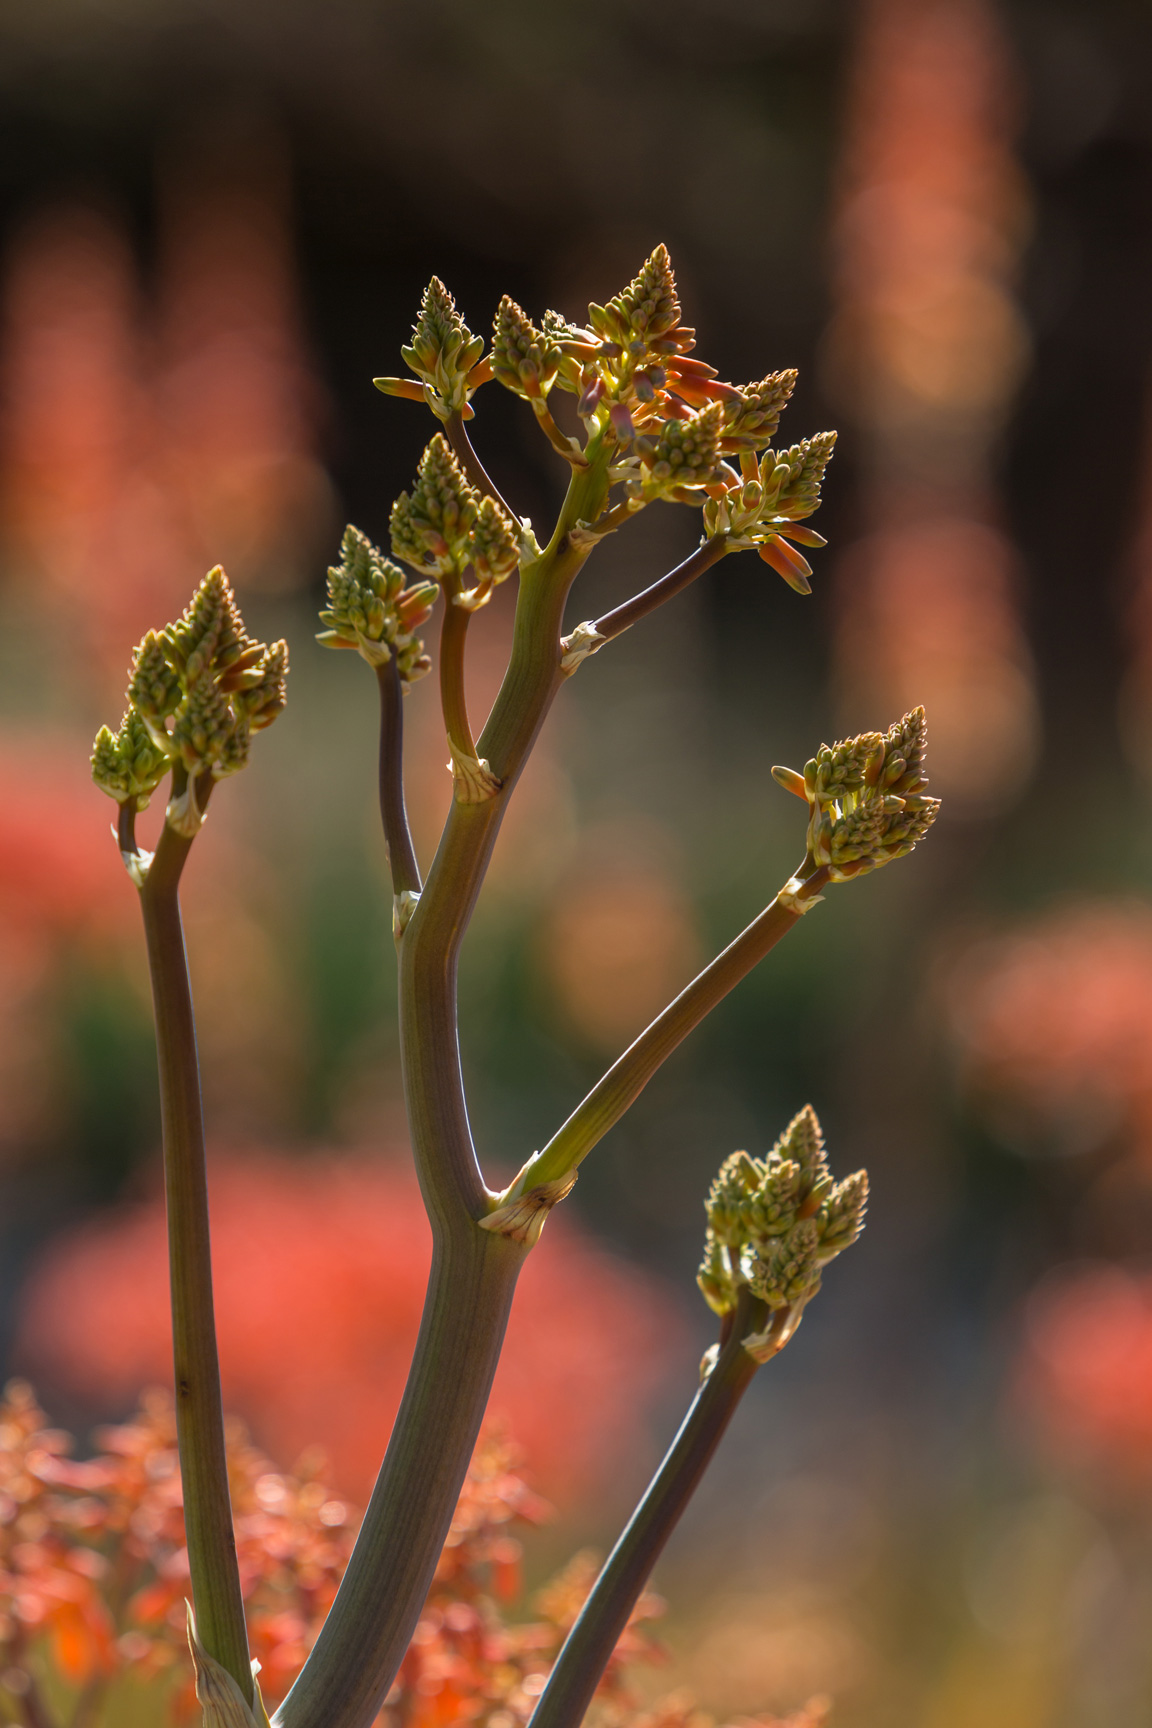 Buds of Coral Aloe flowers form on a stalk.